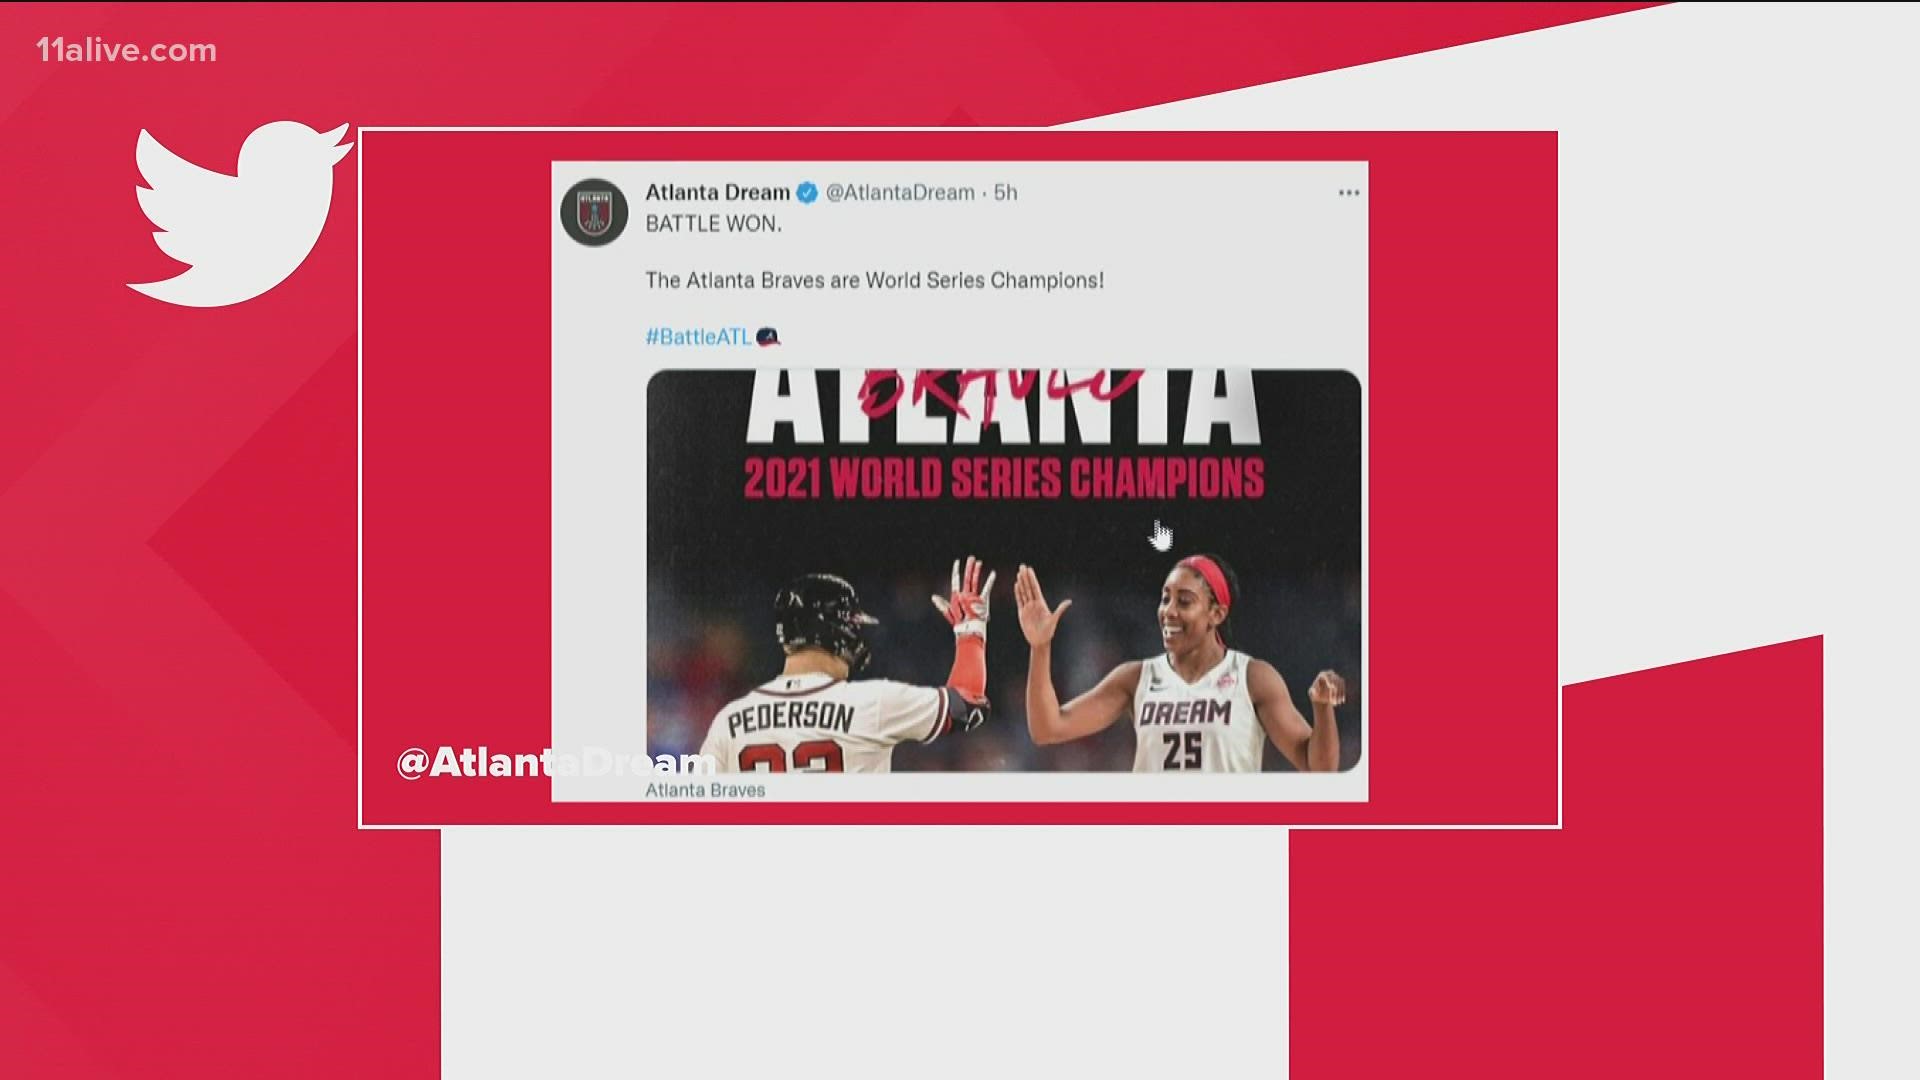 Fellow Atlanta sports franchises weighed in on social media to congratulate the Braves in their World Series win.